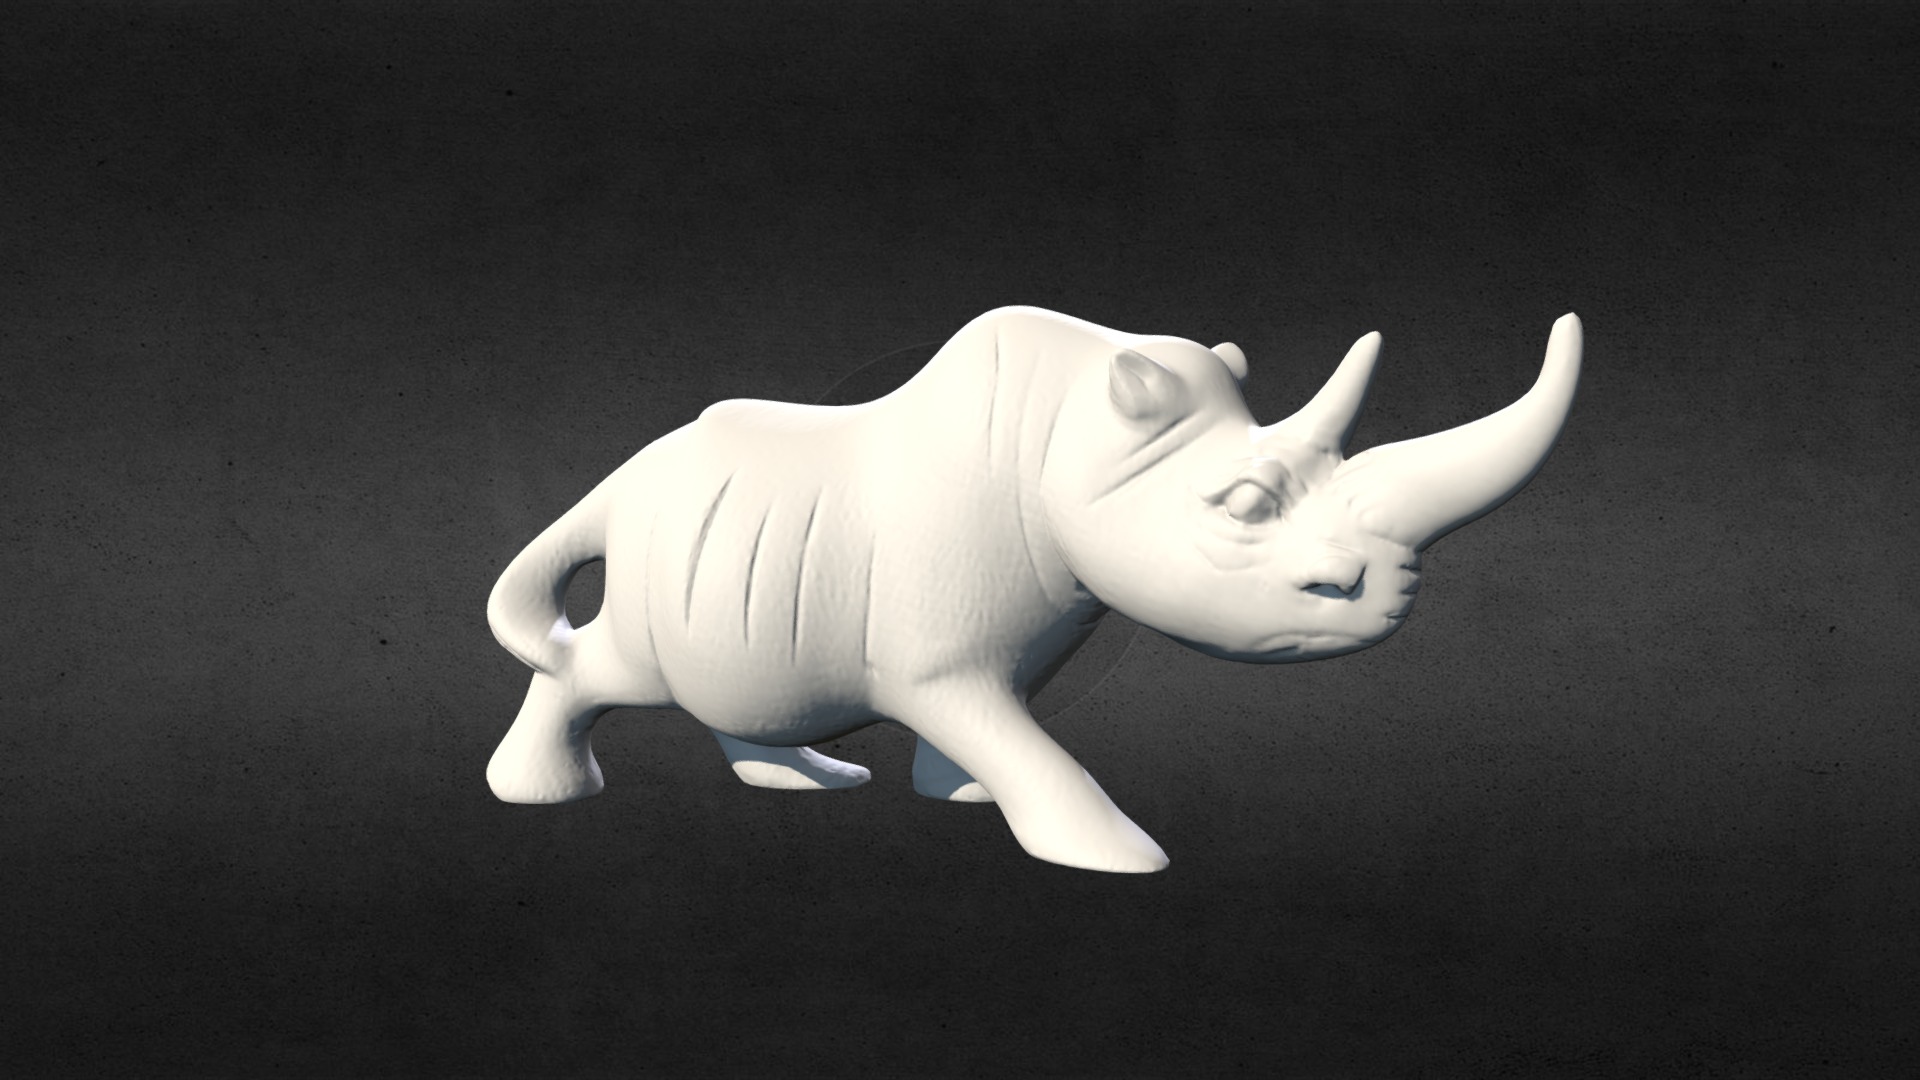 3D model 3D Scanned Rhino Sculpture (3D Printable) - This is a 3D model of the 3D Scanned Rhino Sculpture (3D Printable). The 3D model is about a white statue of a rabbit.